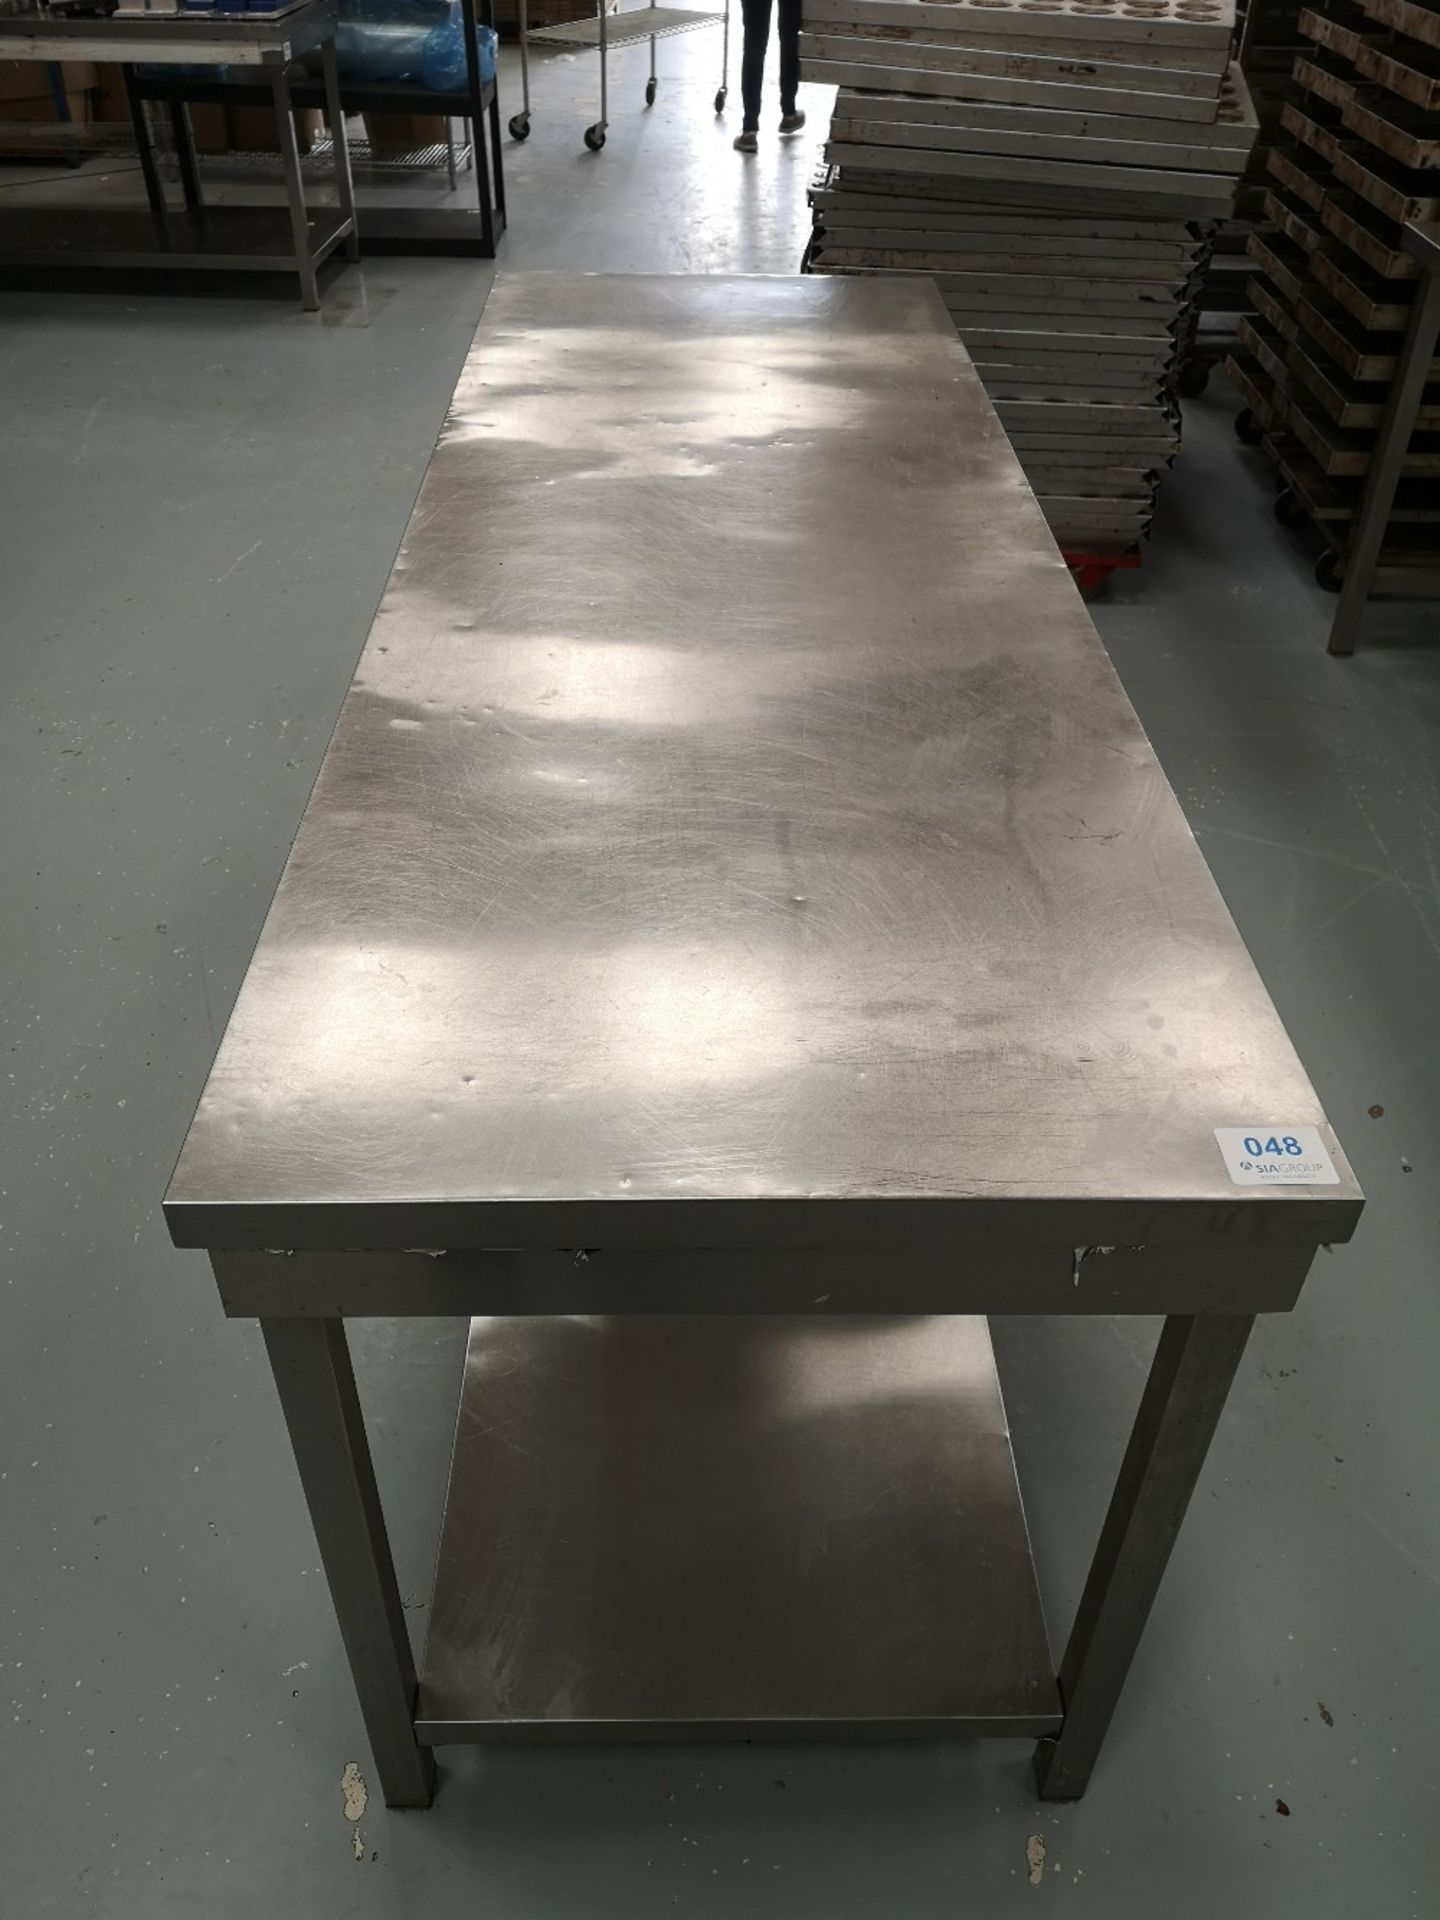 Stainless Steel Two Tier Preparation Table - Image 2 of 2